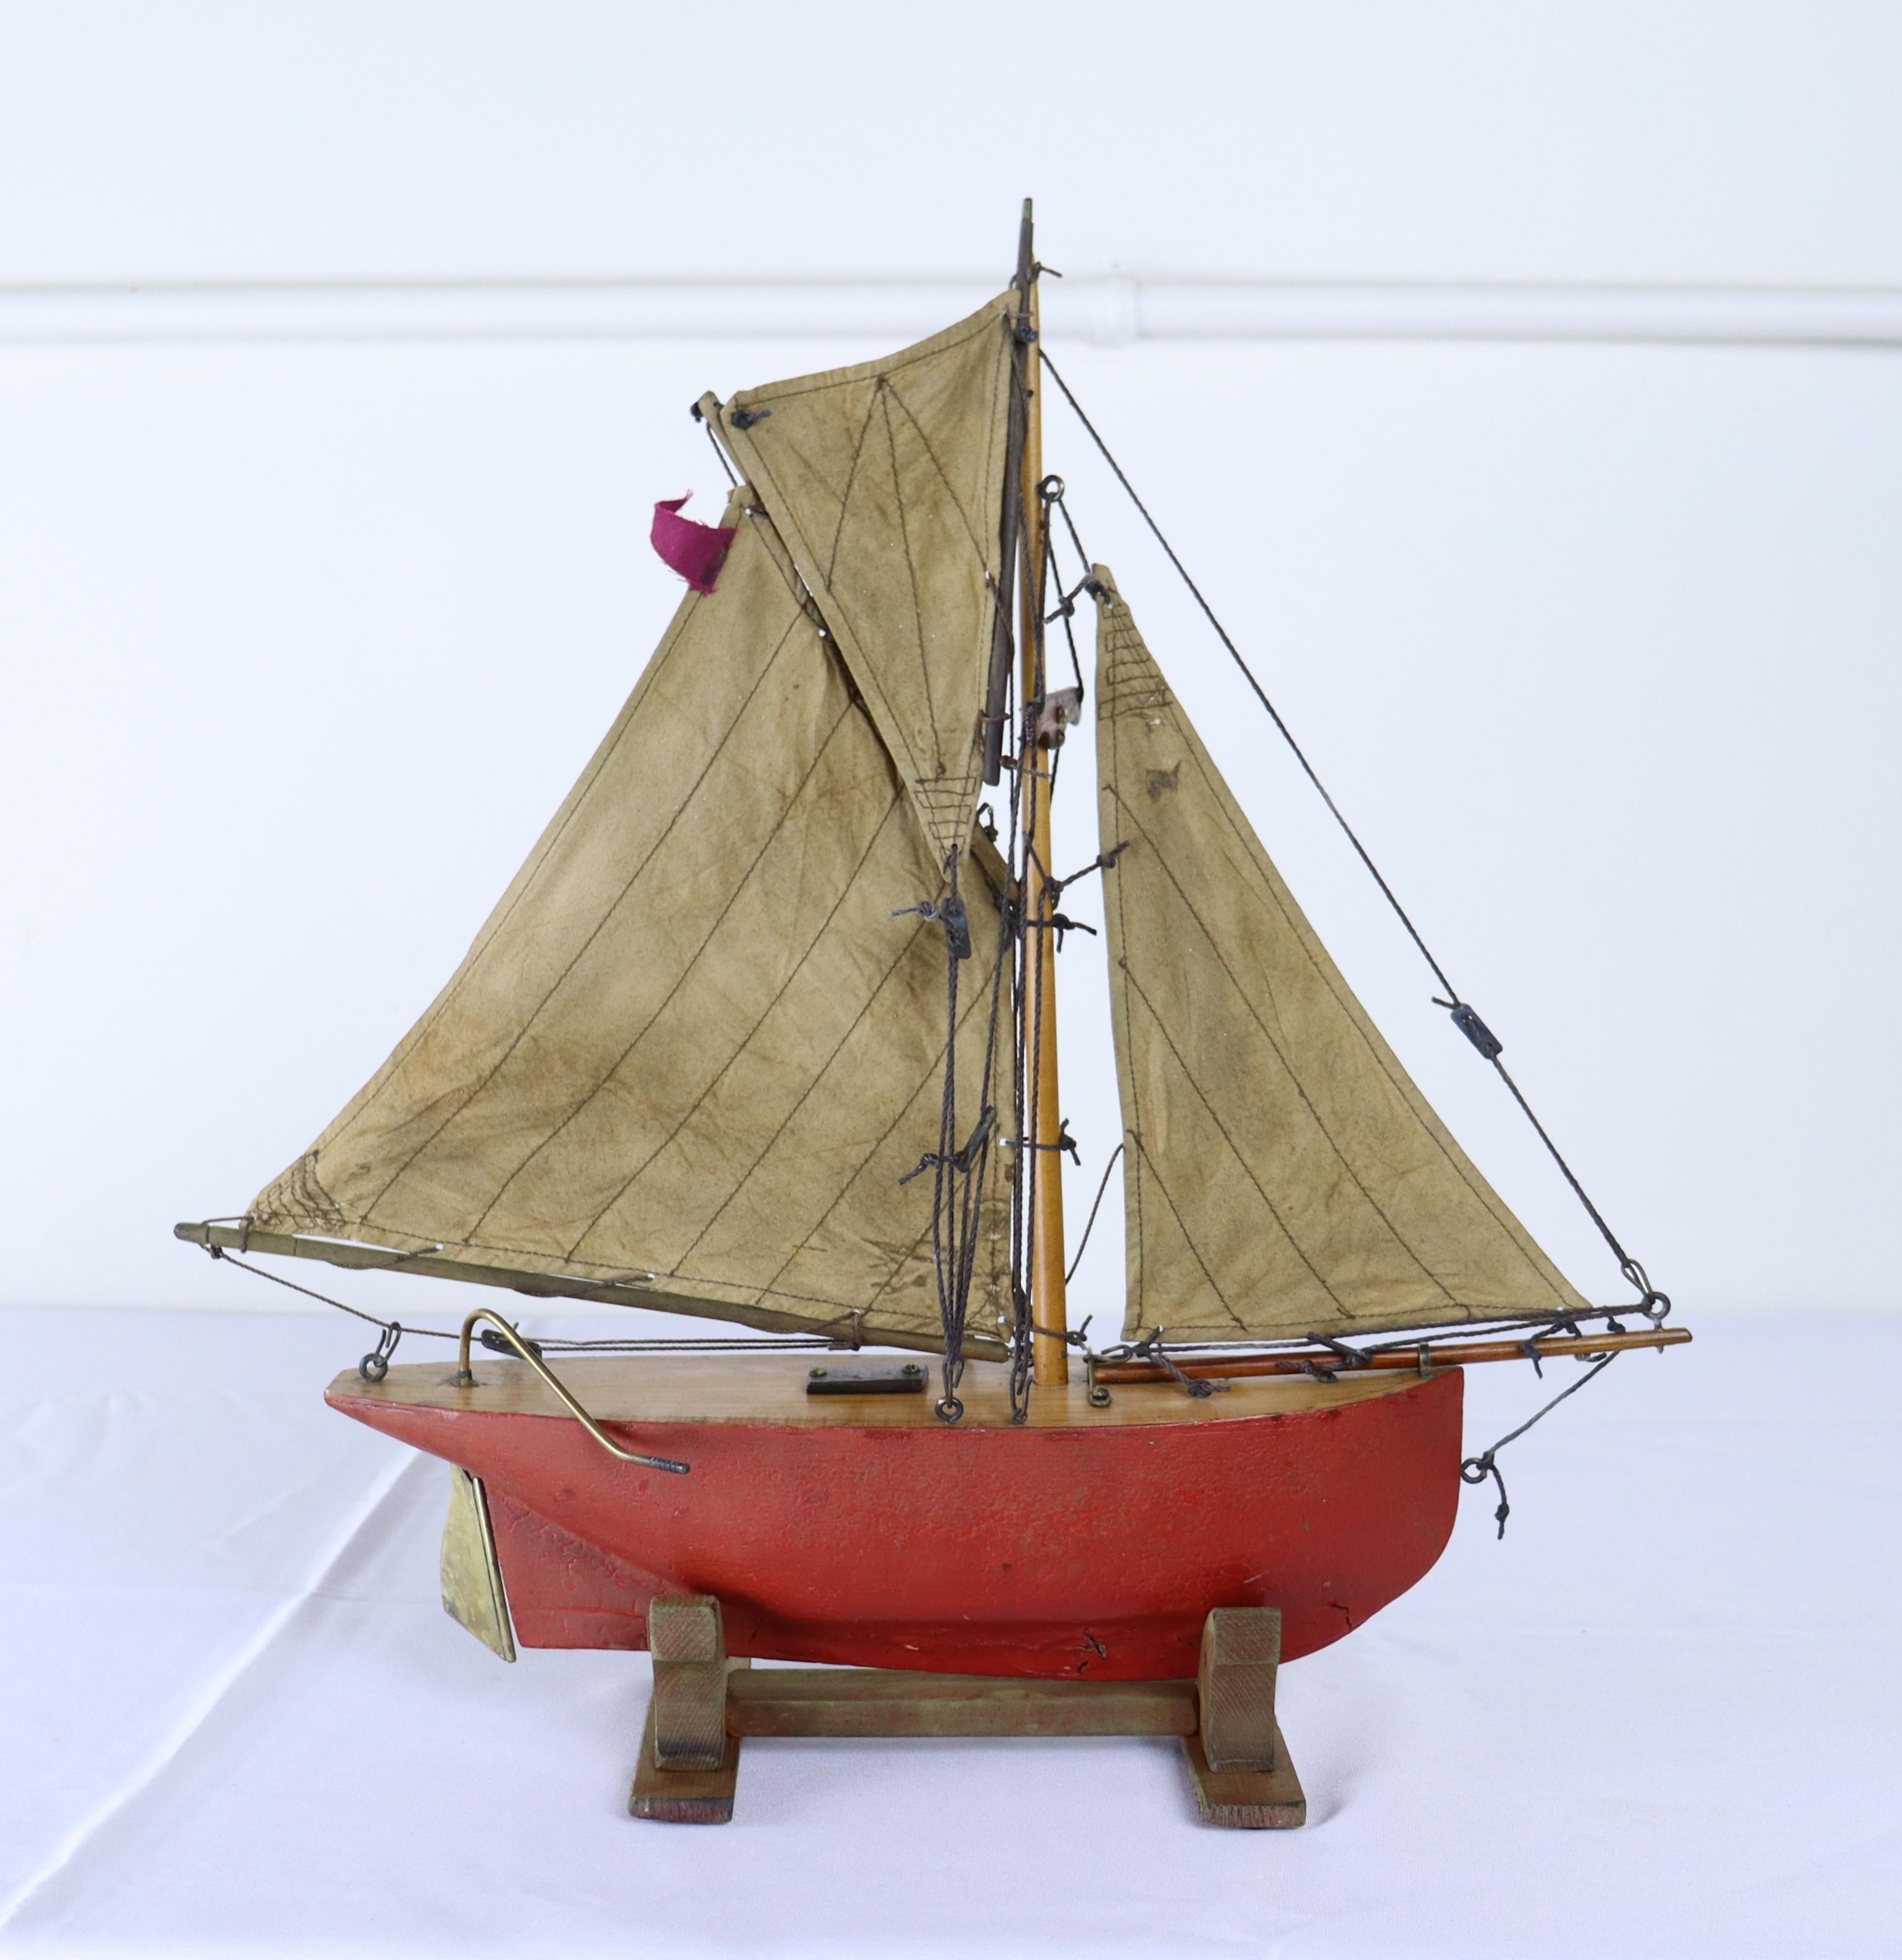 A charming vintage model yacht with sails made from old sail cloth and original brass accents. Stand is recent to hold the ship upright and stabile.  Measurements include the stand.